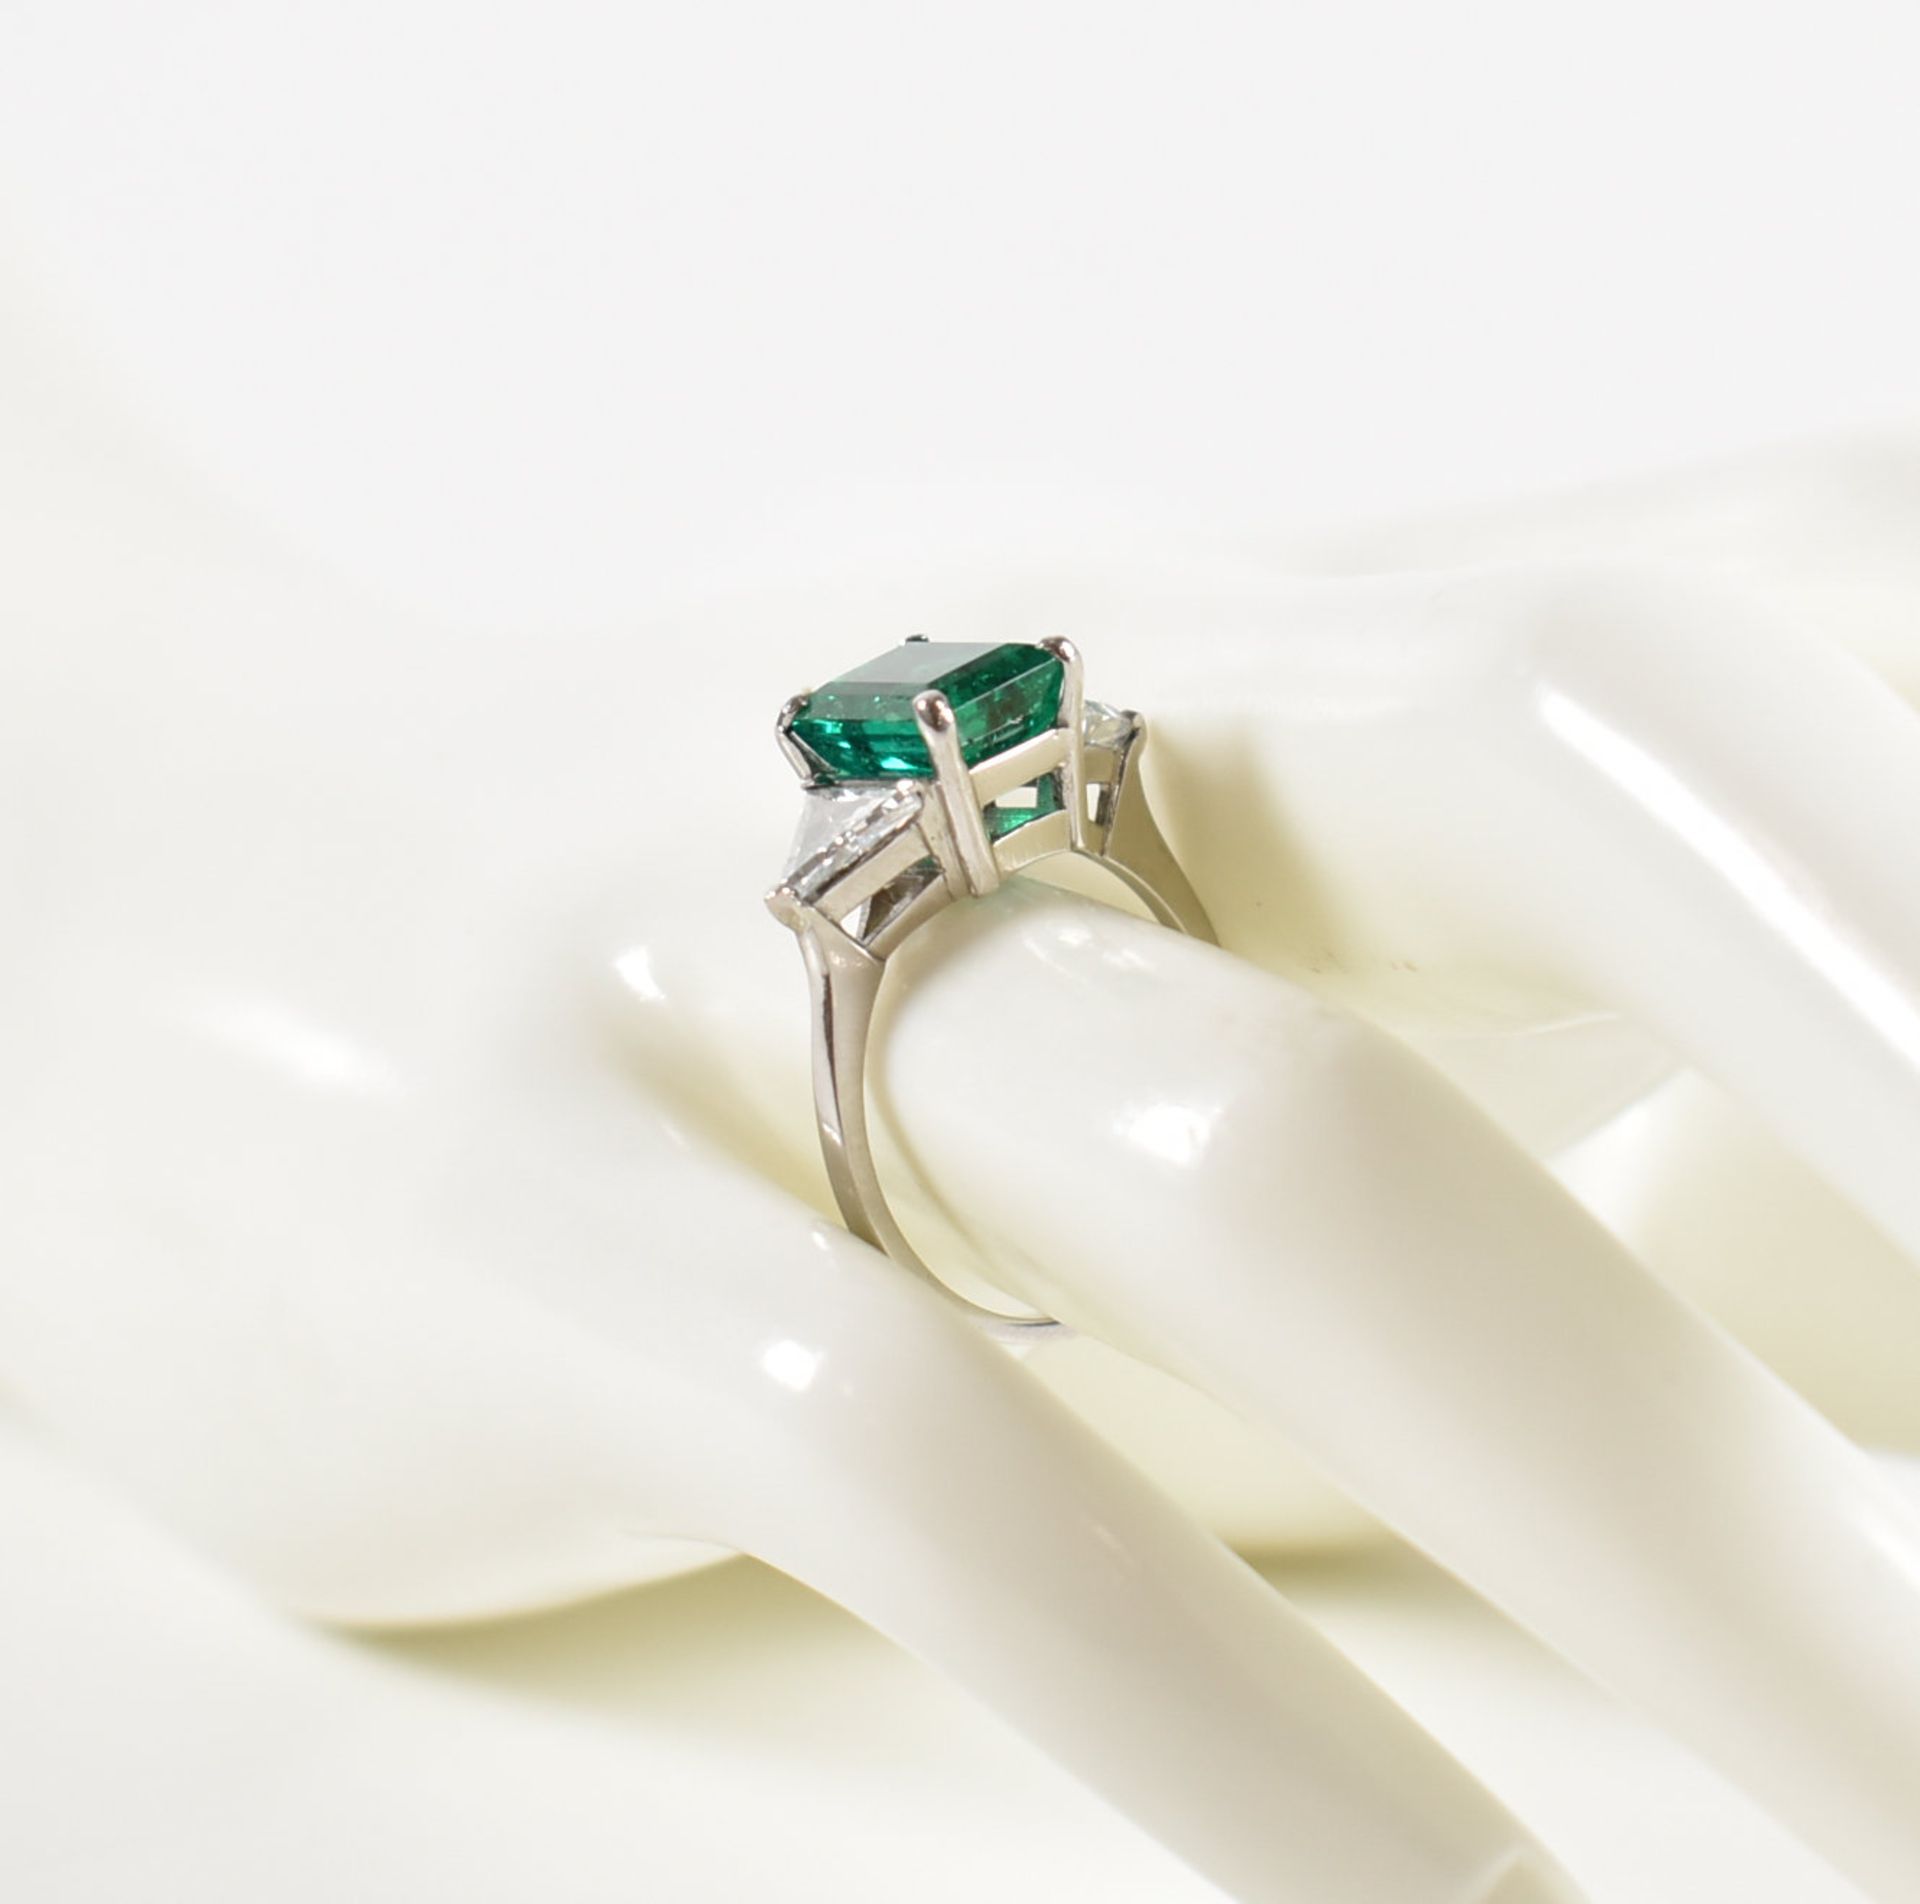 18CT WHITE GOLD COLOMBIAN EMERALD & DIAMOND RING - Image 12 of 19